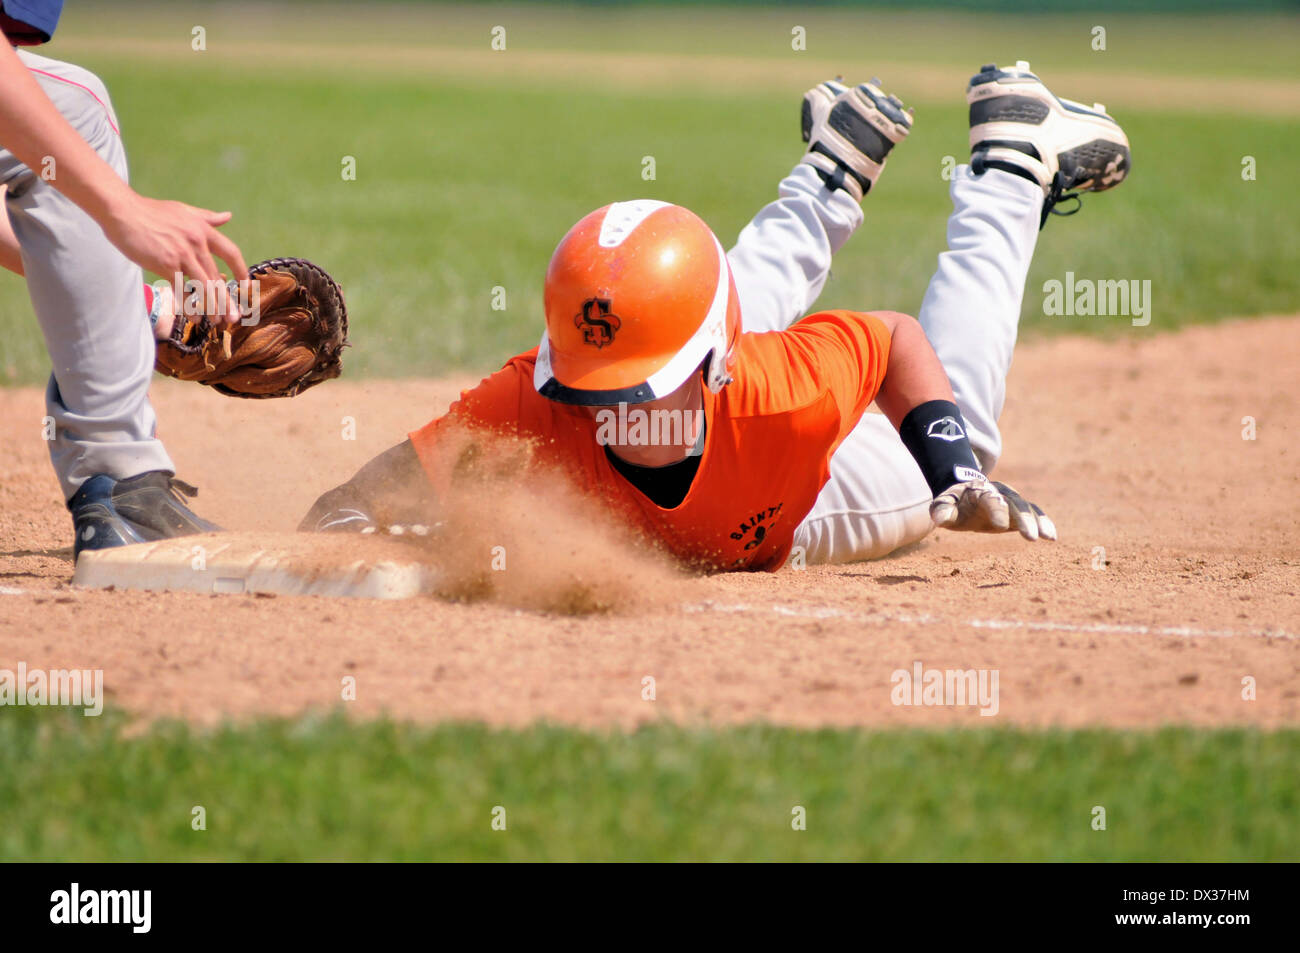 Sport Baseball Runner dives to first base ahead of a tag St. Charles Illinois Stock Photo